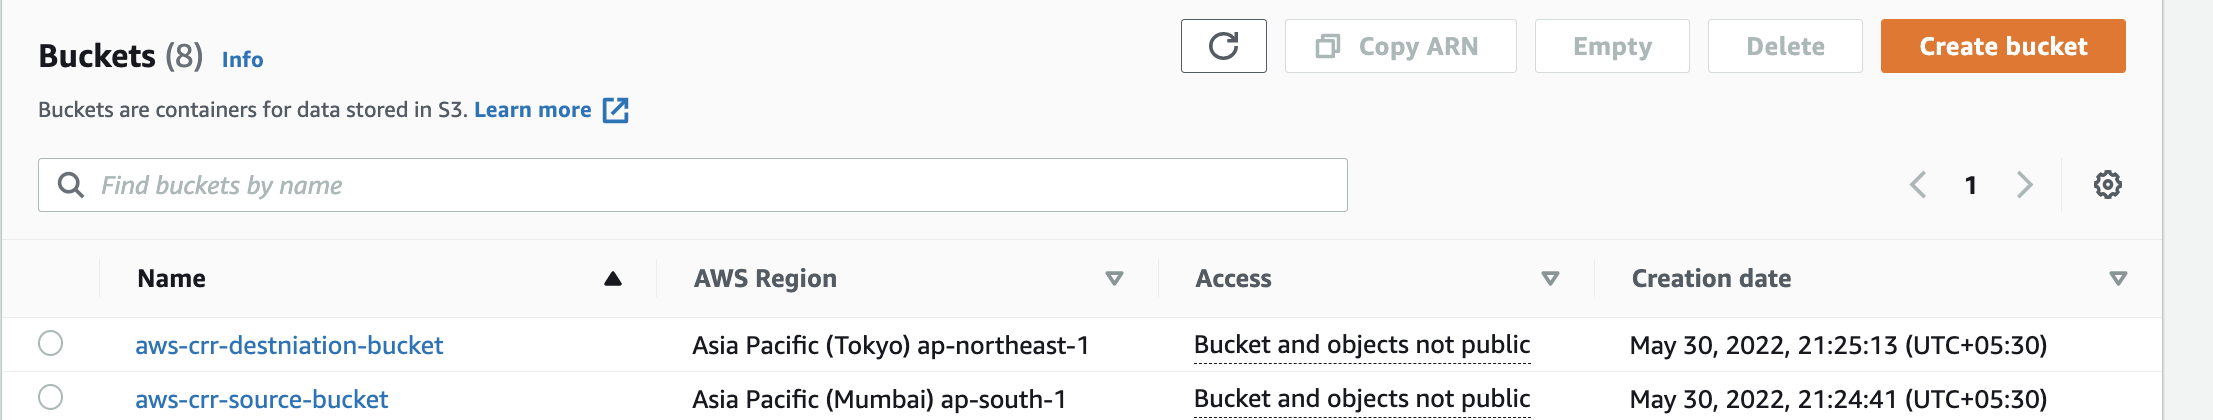 Amazon S3 source and destination bucket in different regions.png